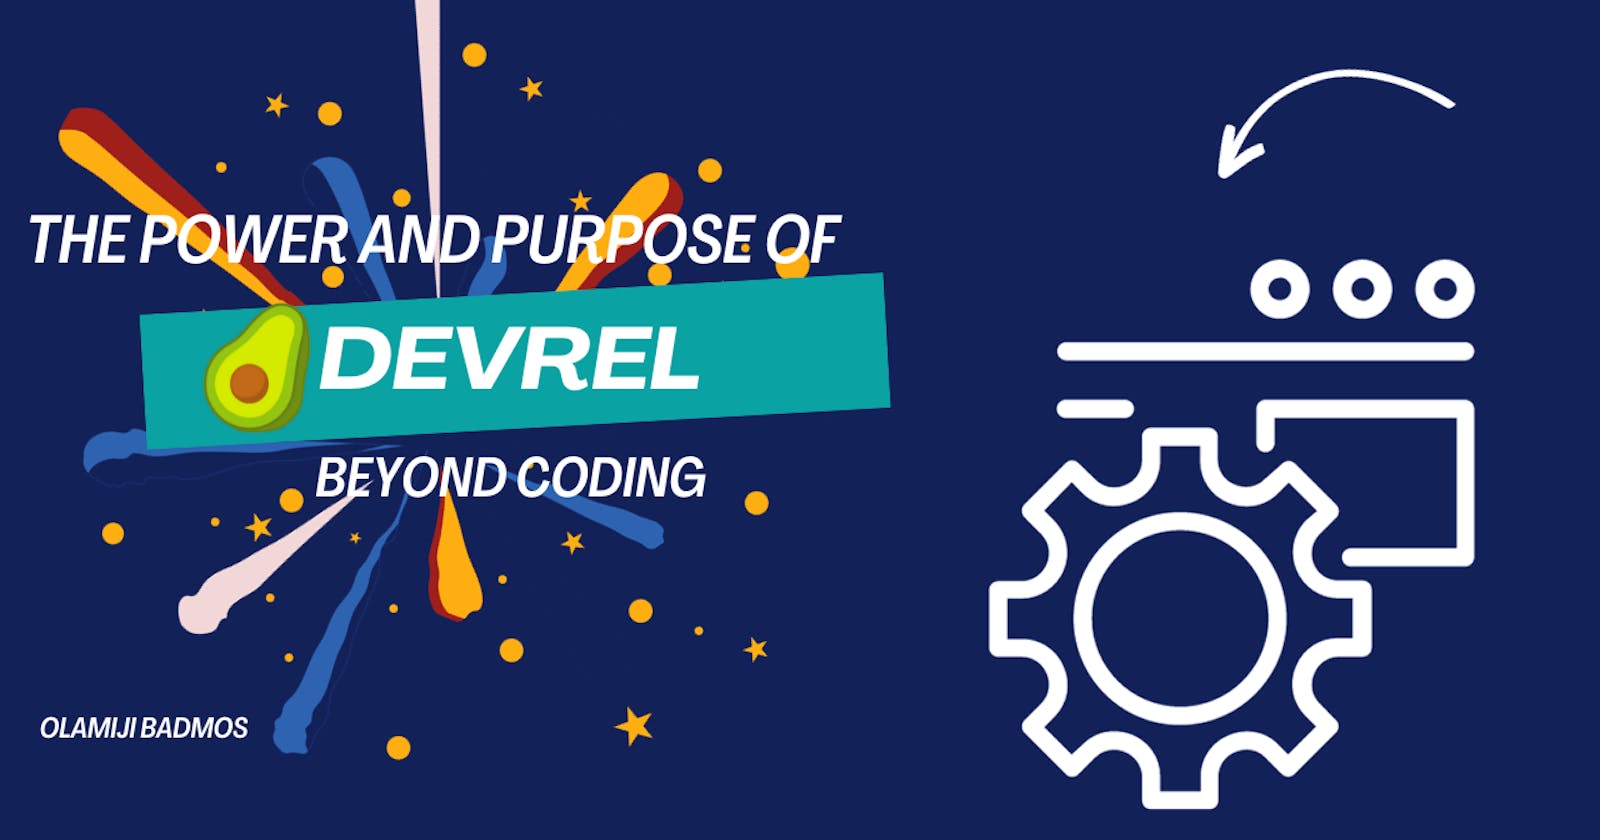 The Power and Purpose of DevRel